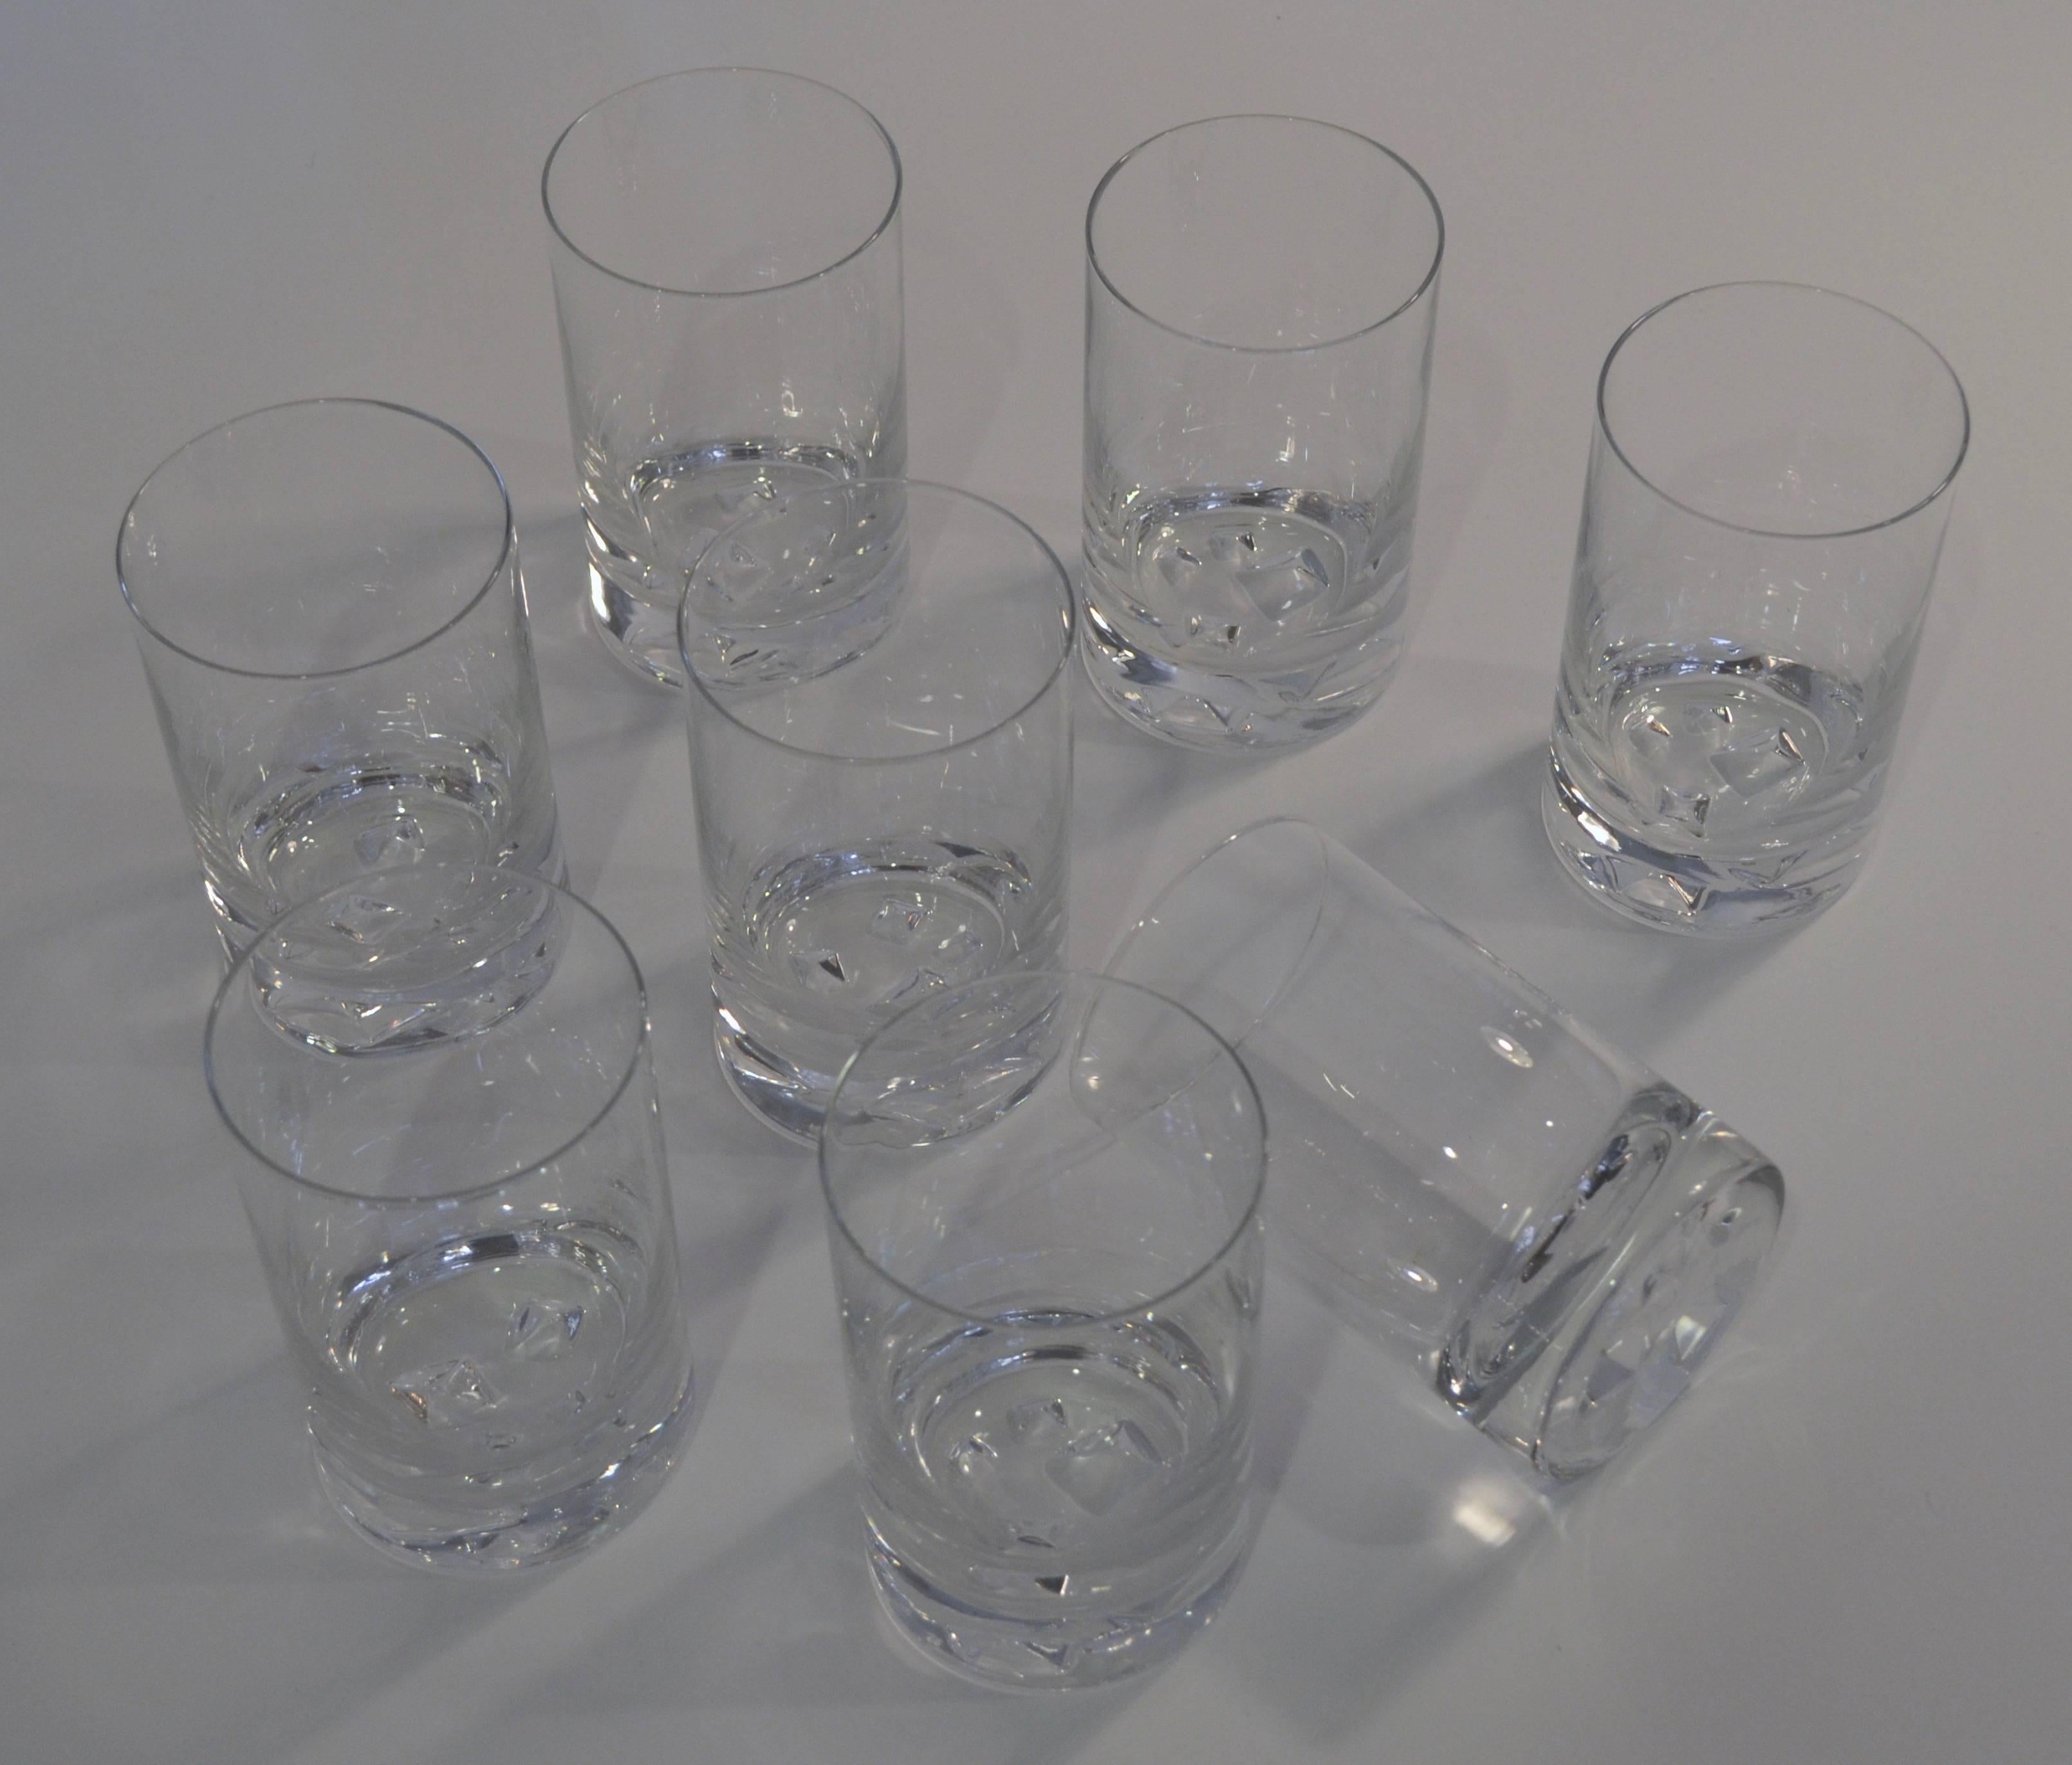 Tapio Wirkkala used ice Formations and water flow as his inspiration for his "IceBreaker" glassware for Iittala circa 1960s. They are made of turned mold-blown clear glass. This series has a heavy bottom with four ice block sculptures